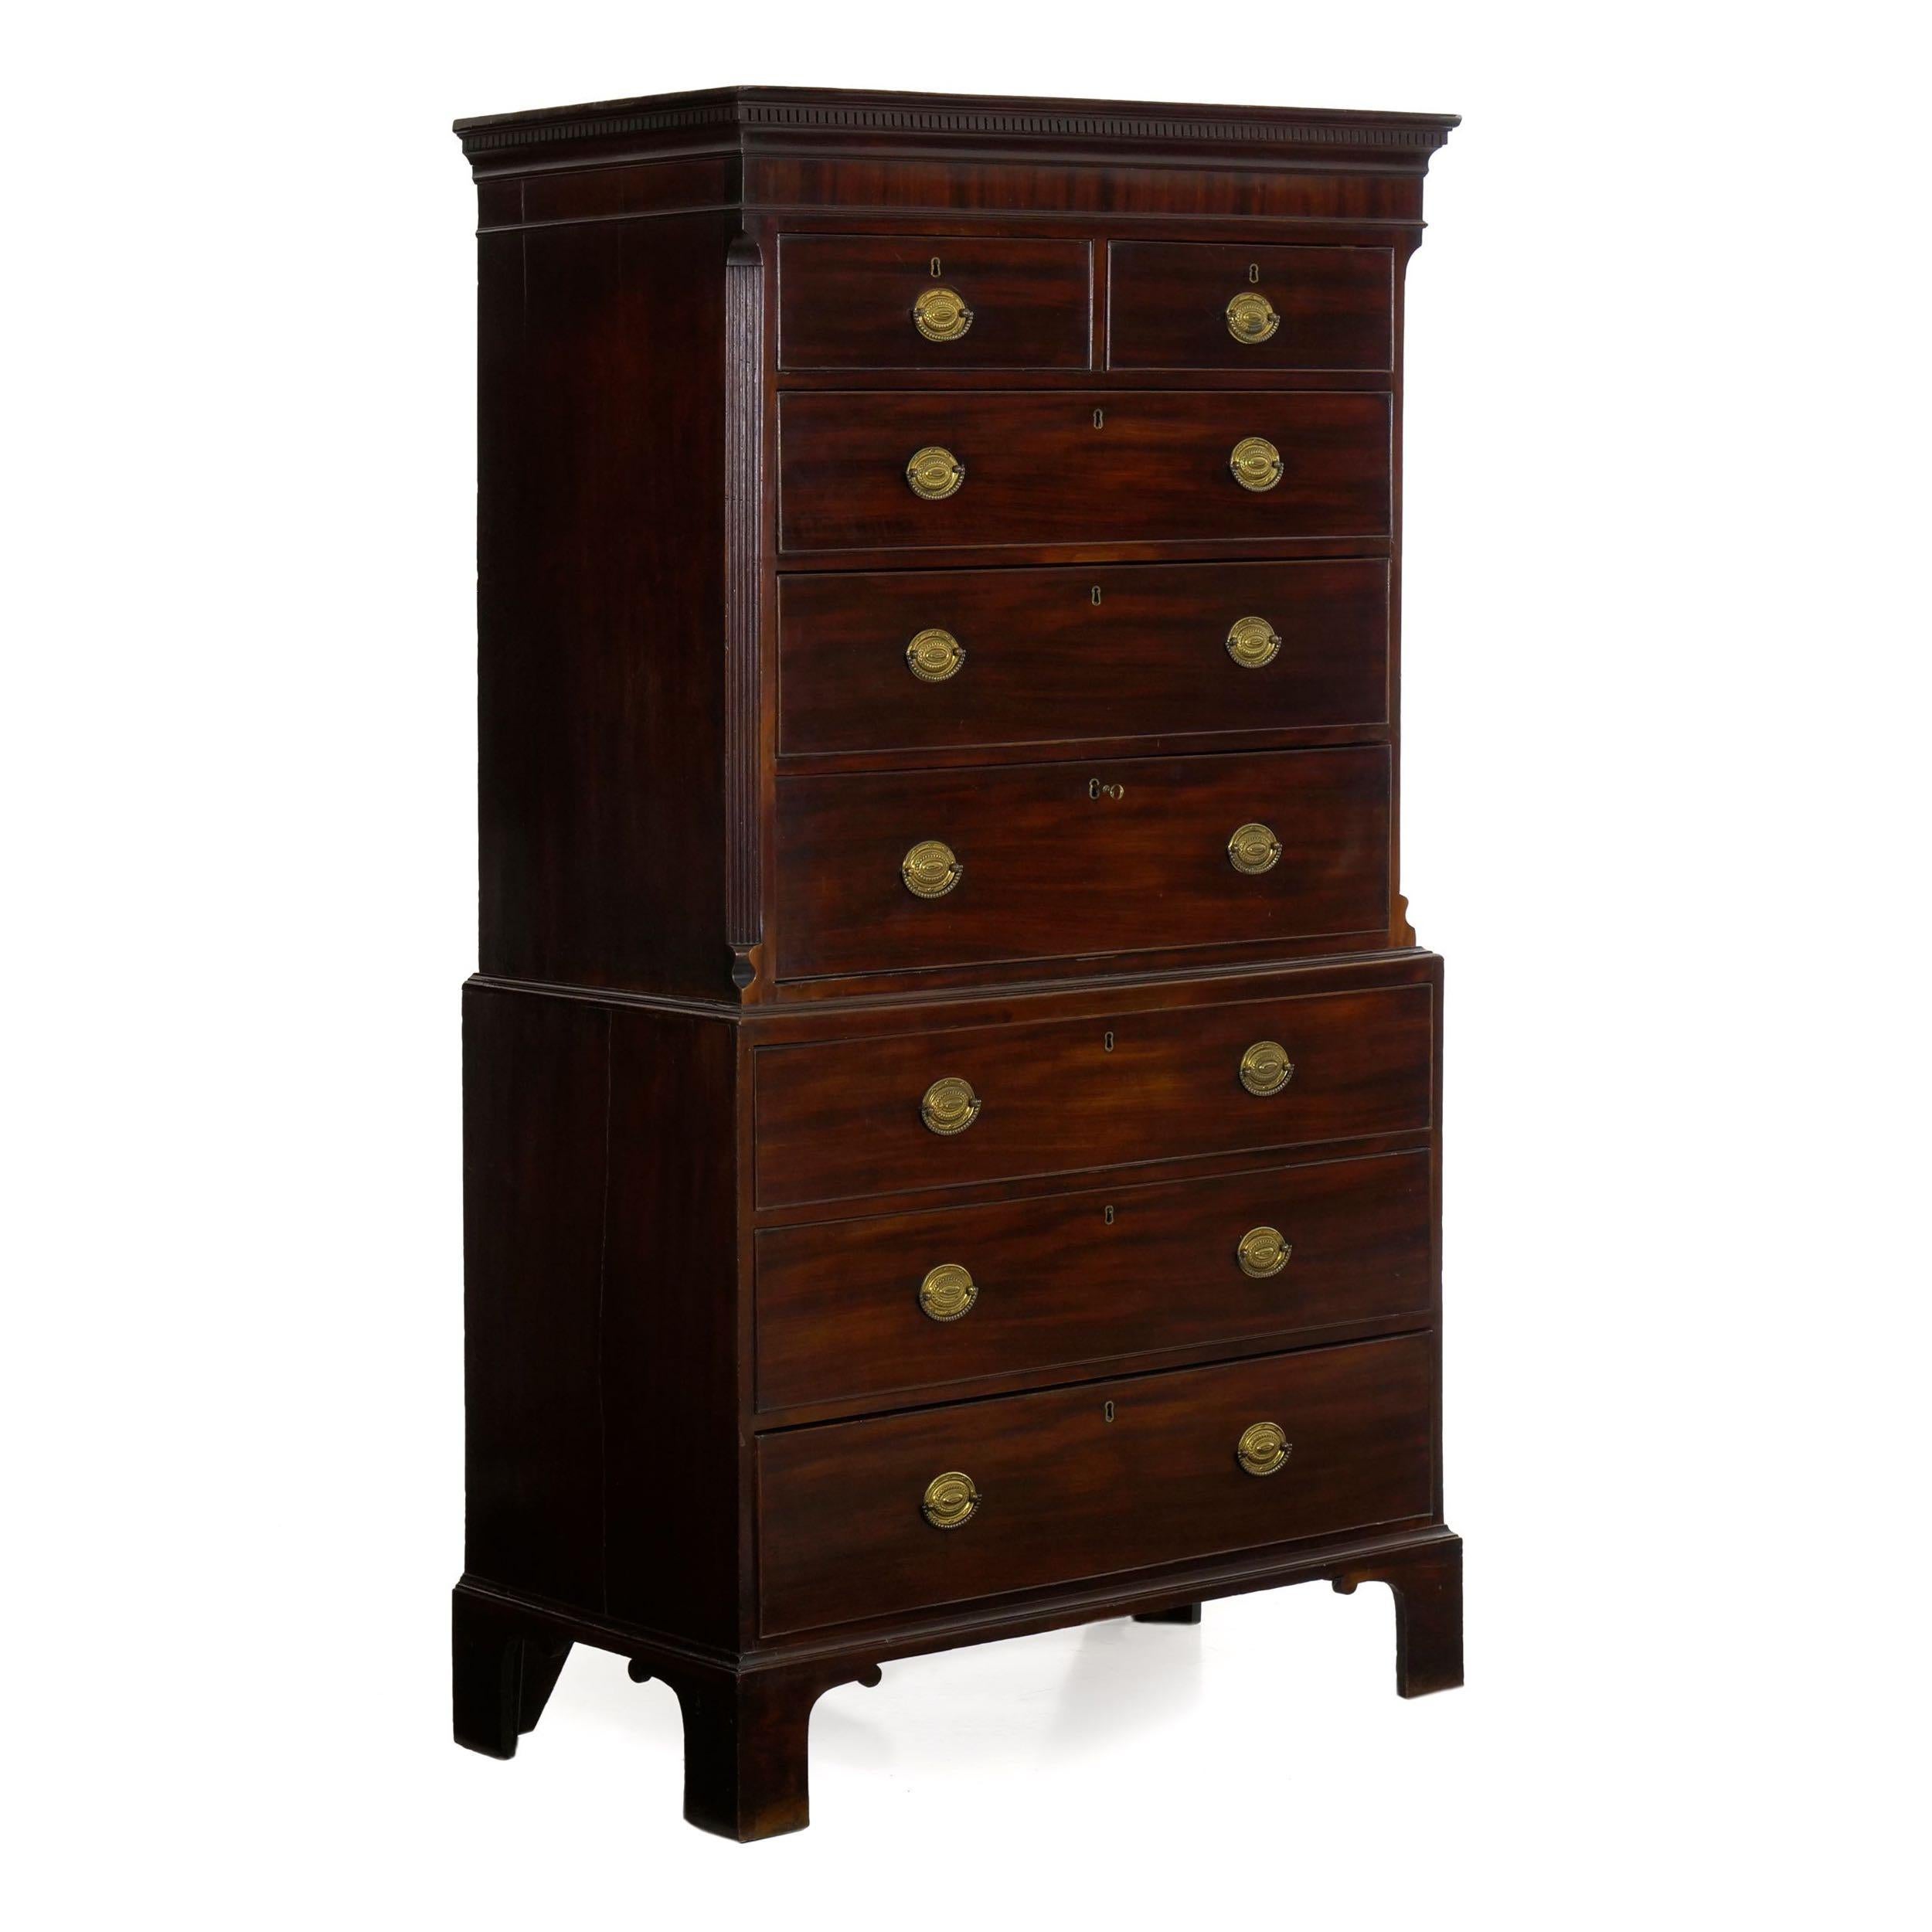 GEORGE III MAHOGANY CHEST ON CHEST
England, circa 1800
Item # 905KUB29A

Crafted of a dark and dense mahogany, both in the solid and veneer forms, this excellent George III period chest on chest has a lovely overall surface patination built up from